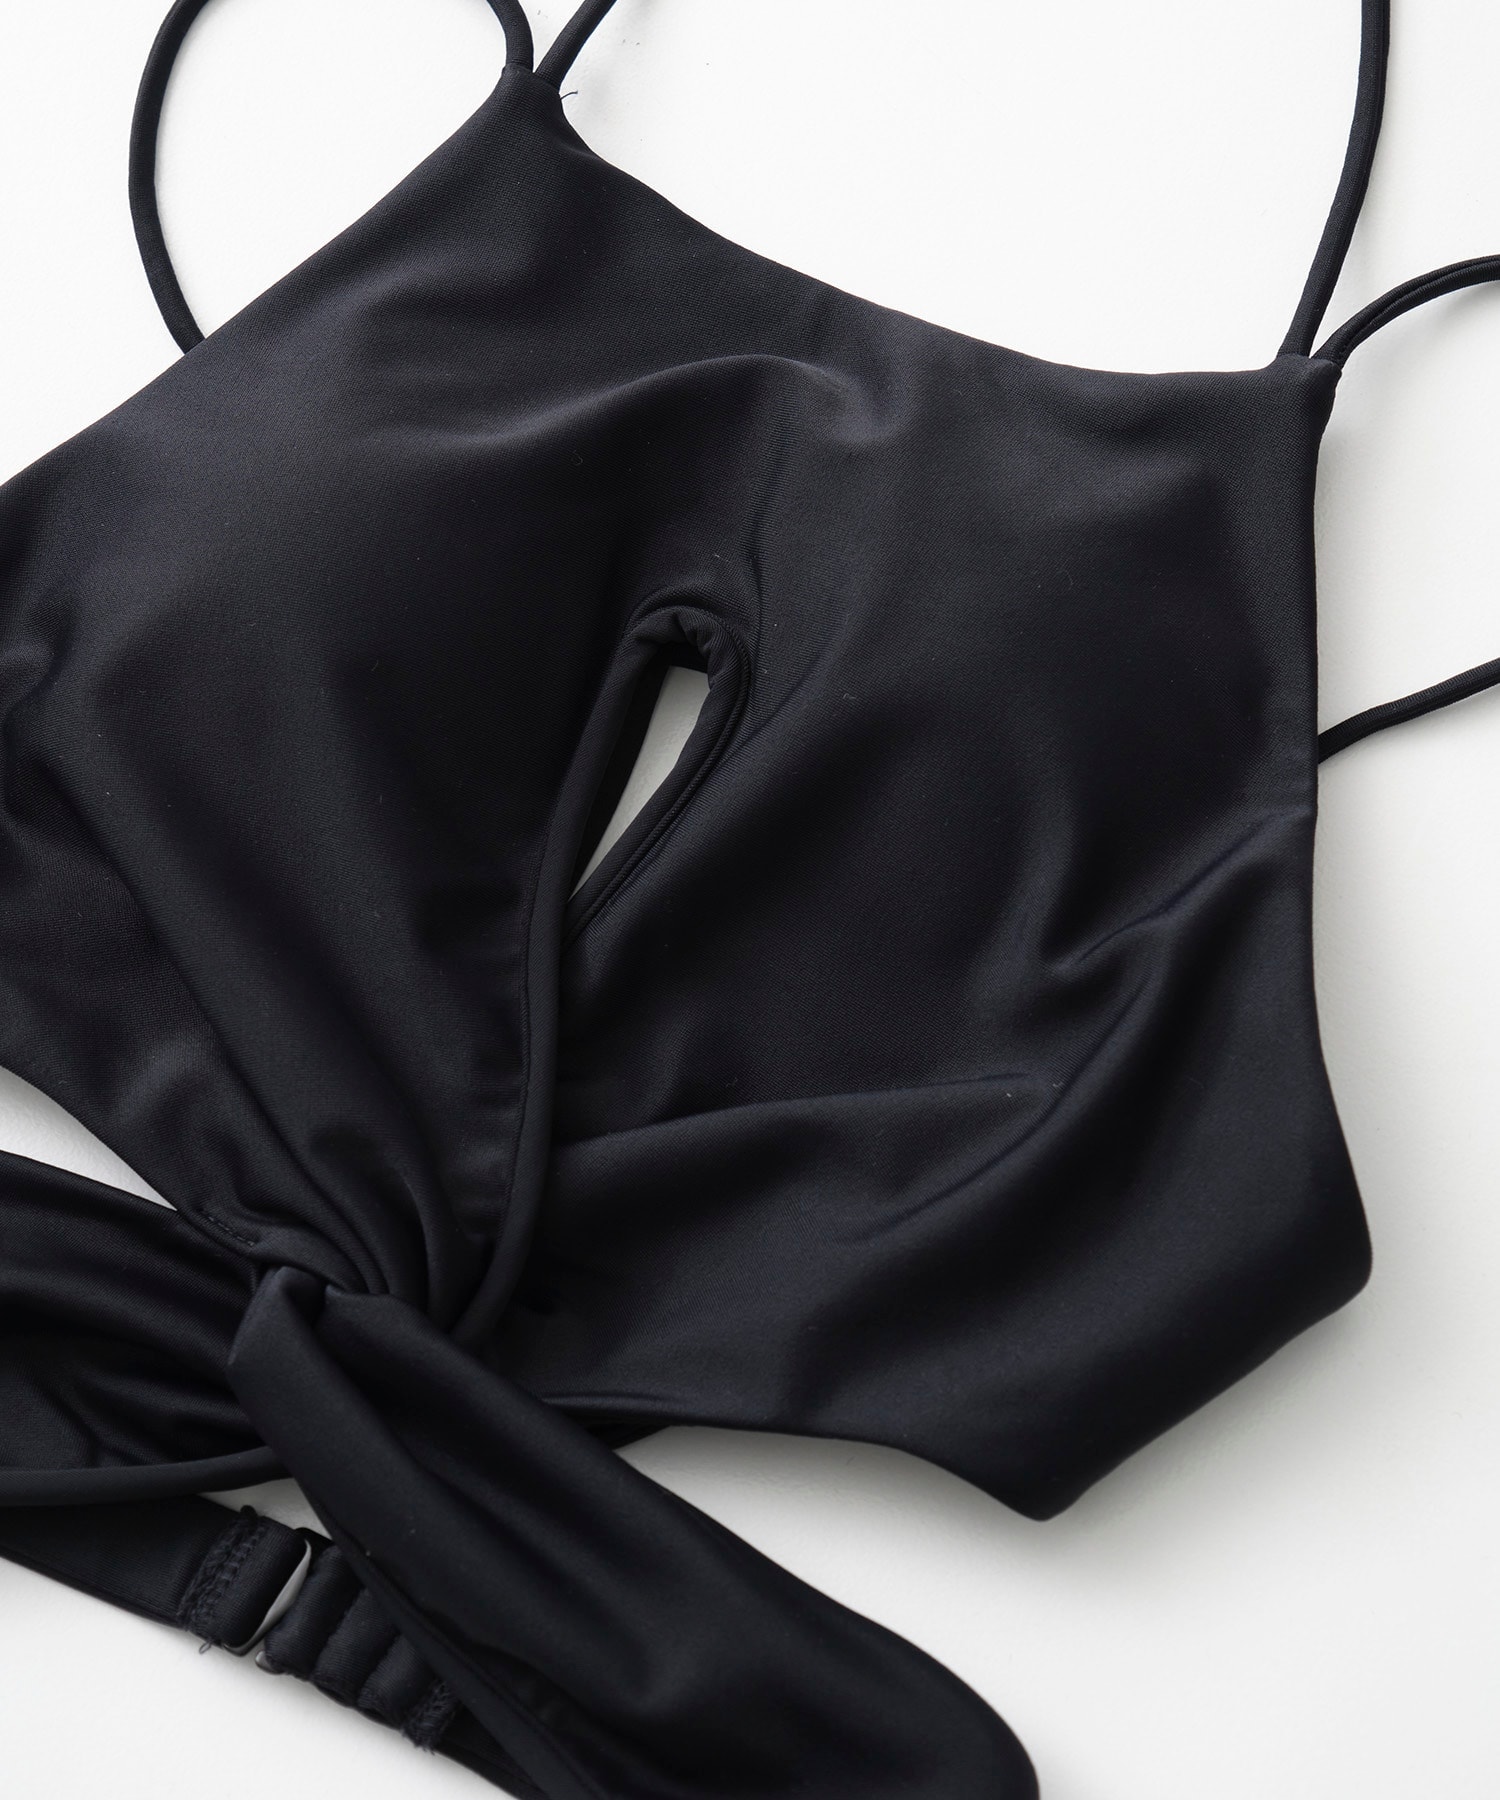 TWISTED TWO-PIECE SWIMSUIT FETICO